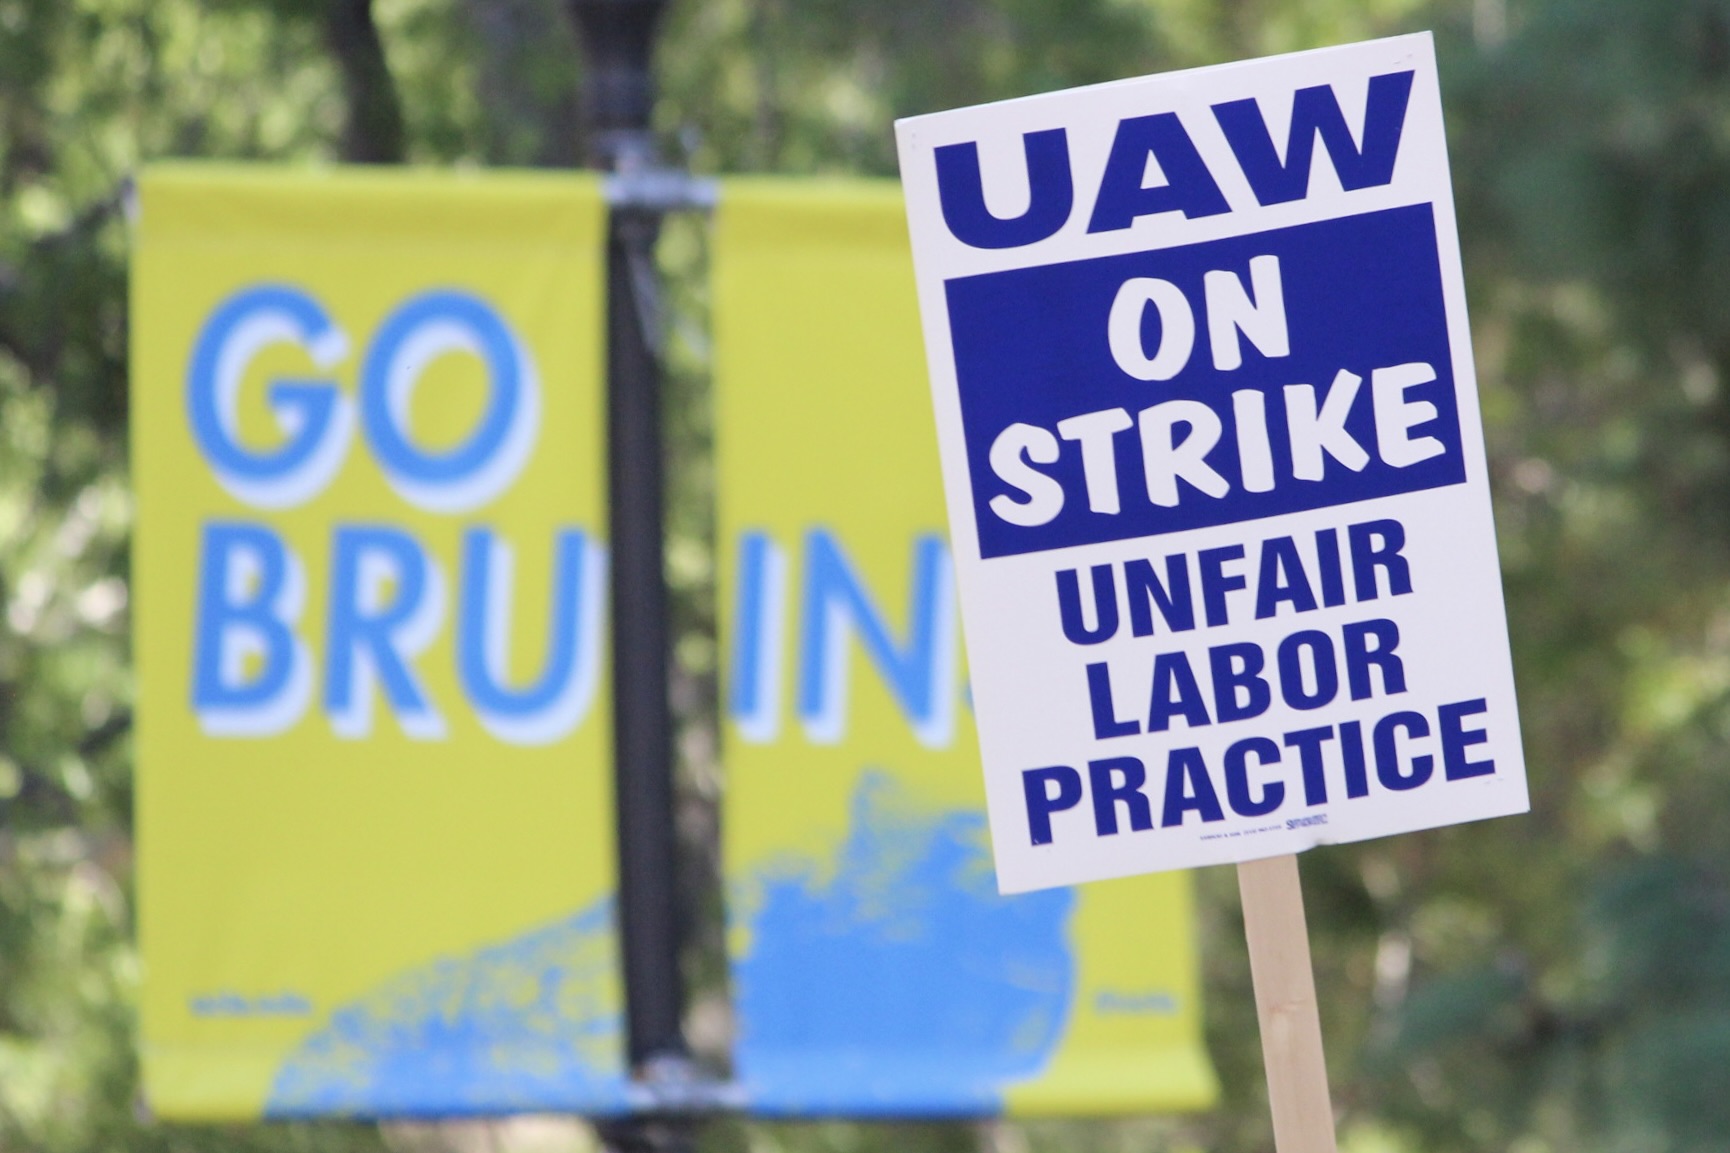 photo of a UAW strike sign being held in front of a go bruins banner